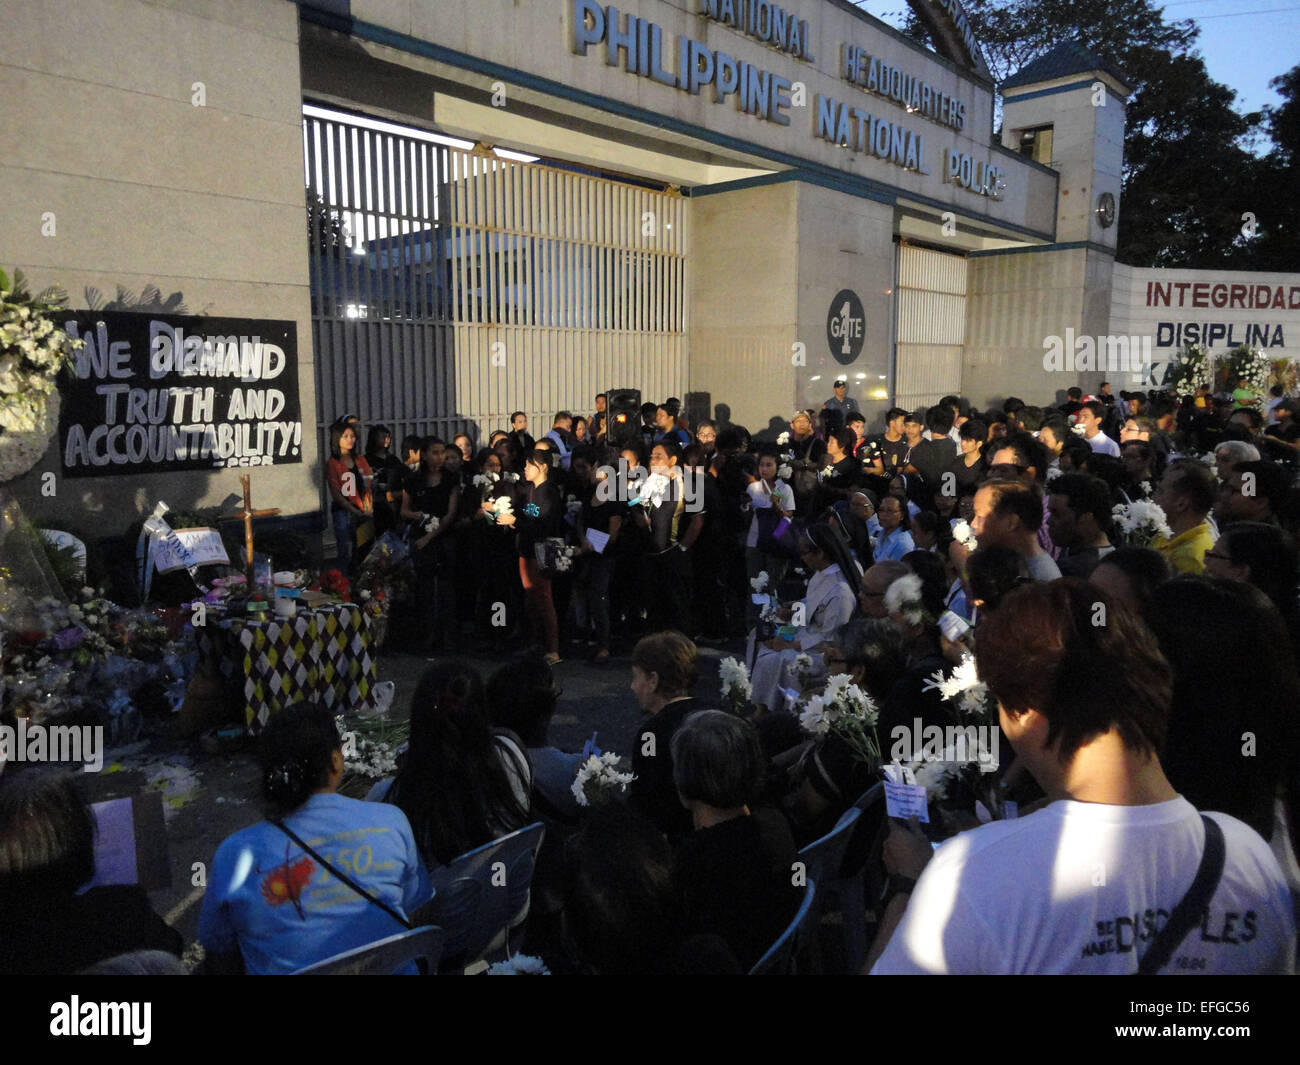 Quezon City, Philippines. 3rd Feb, 2015. Filipinos gather around an improvised altar outside the Philippine National Police headquarters, as they celebrate mass to commemorate the victims of the botched anti-terror operation in Mamasapano, Maguindanao. A mass was celebrated outside the Philippine National Police headquarters as they called for truth and accountability for the casualties of the botched anti-terror operation in Mamasapano, Maguindanao provionce last January 25, including 44 police commandos, as well as several civilians. Credit:  Richard James Mendoza/Pacific Press/Alamy Live Ne Stock Photo